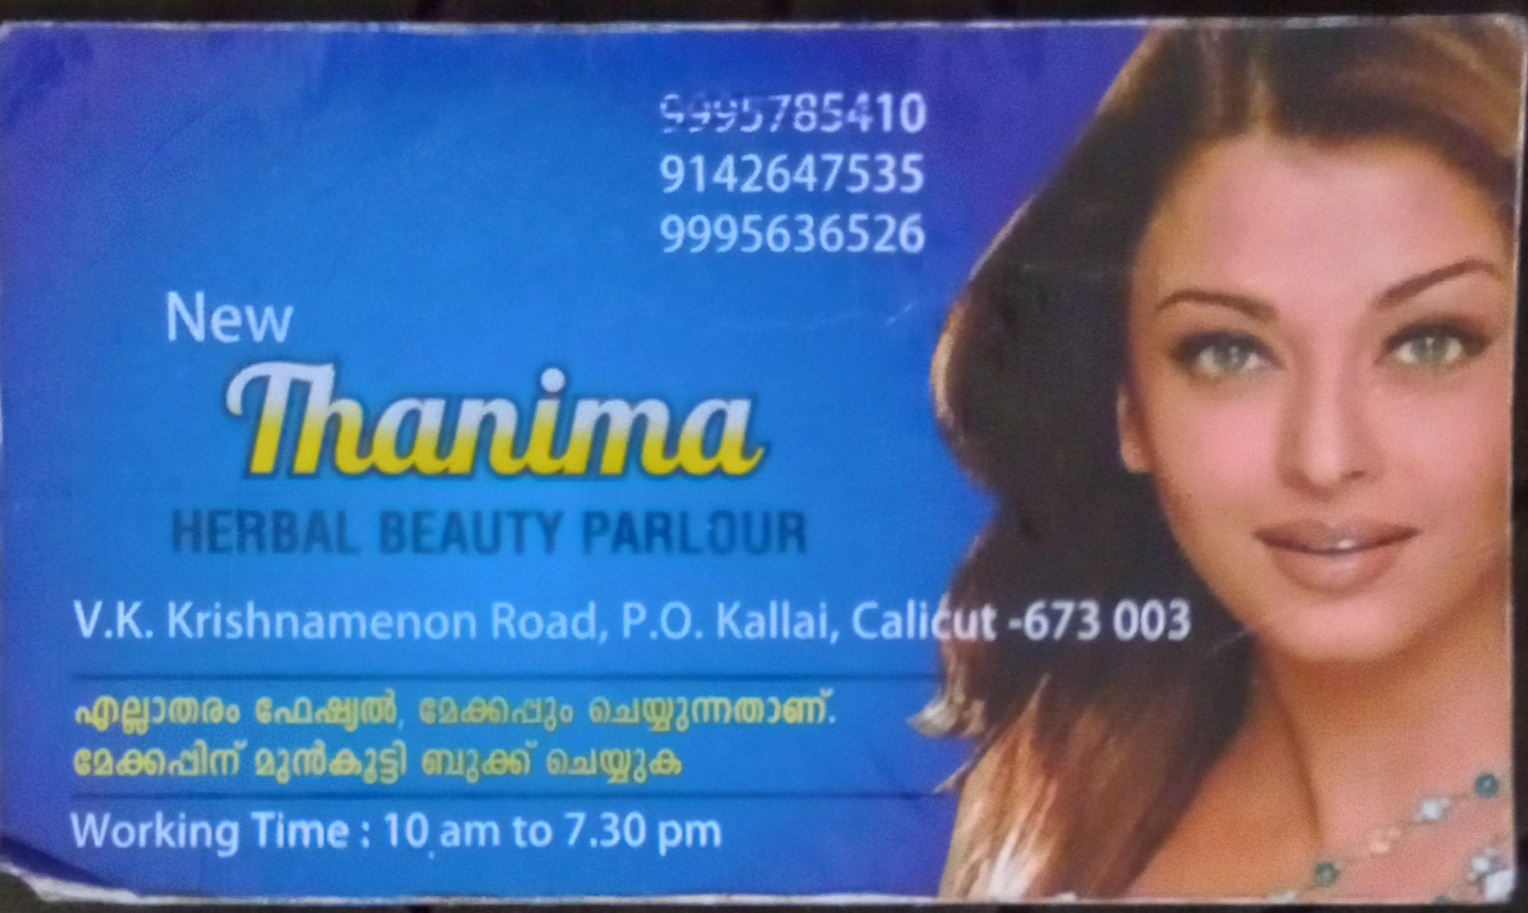 NEW THANIMA HERBAL BEAUTY PARLOUR, BEAUTY PARLOUR,  service in Kozhikode Town, Kozhikode